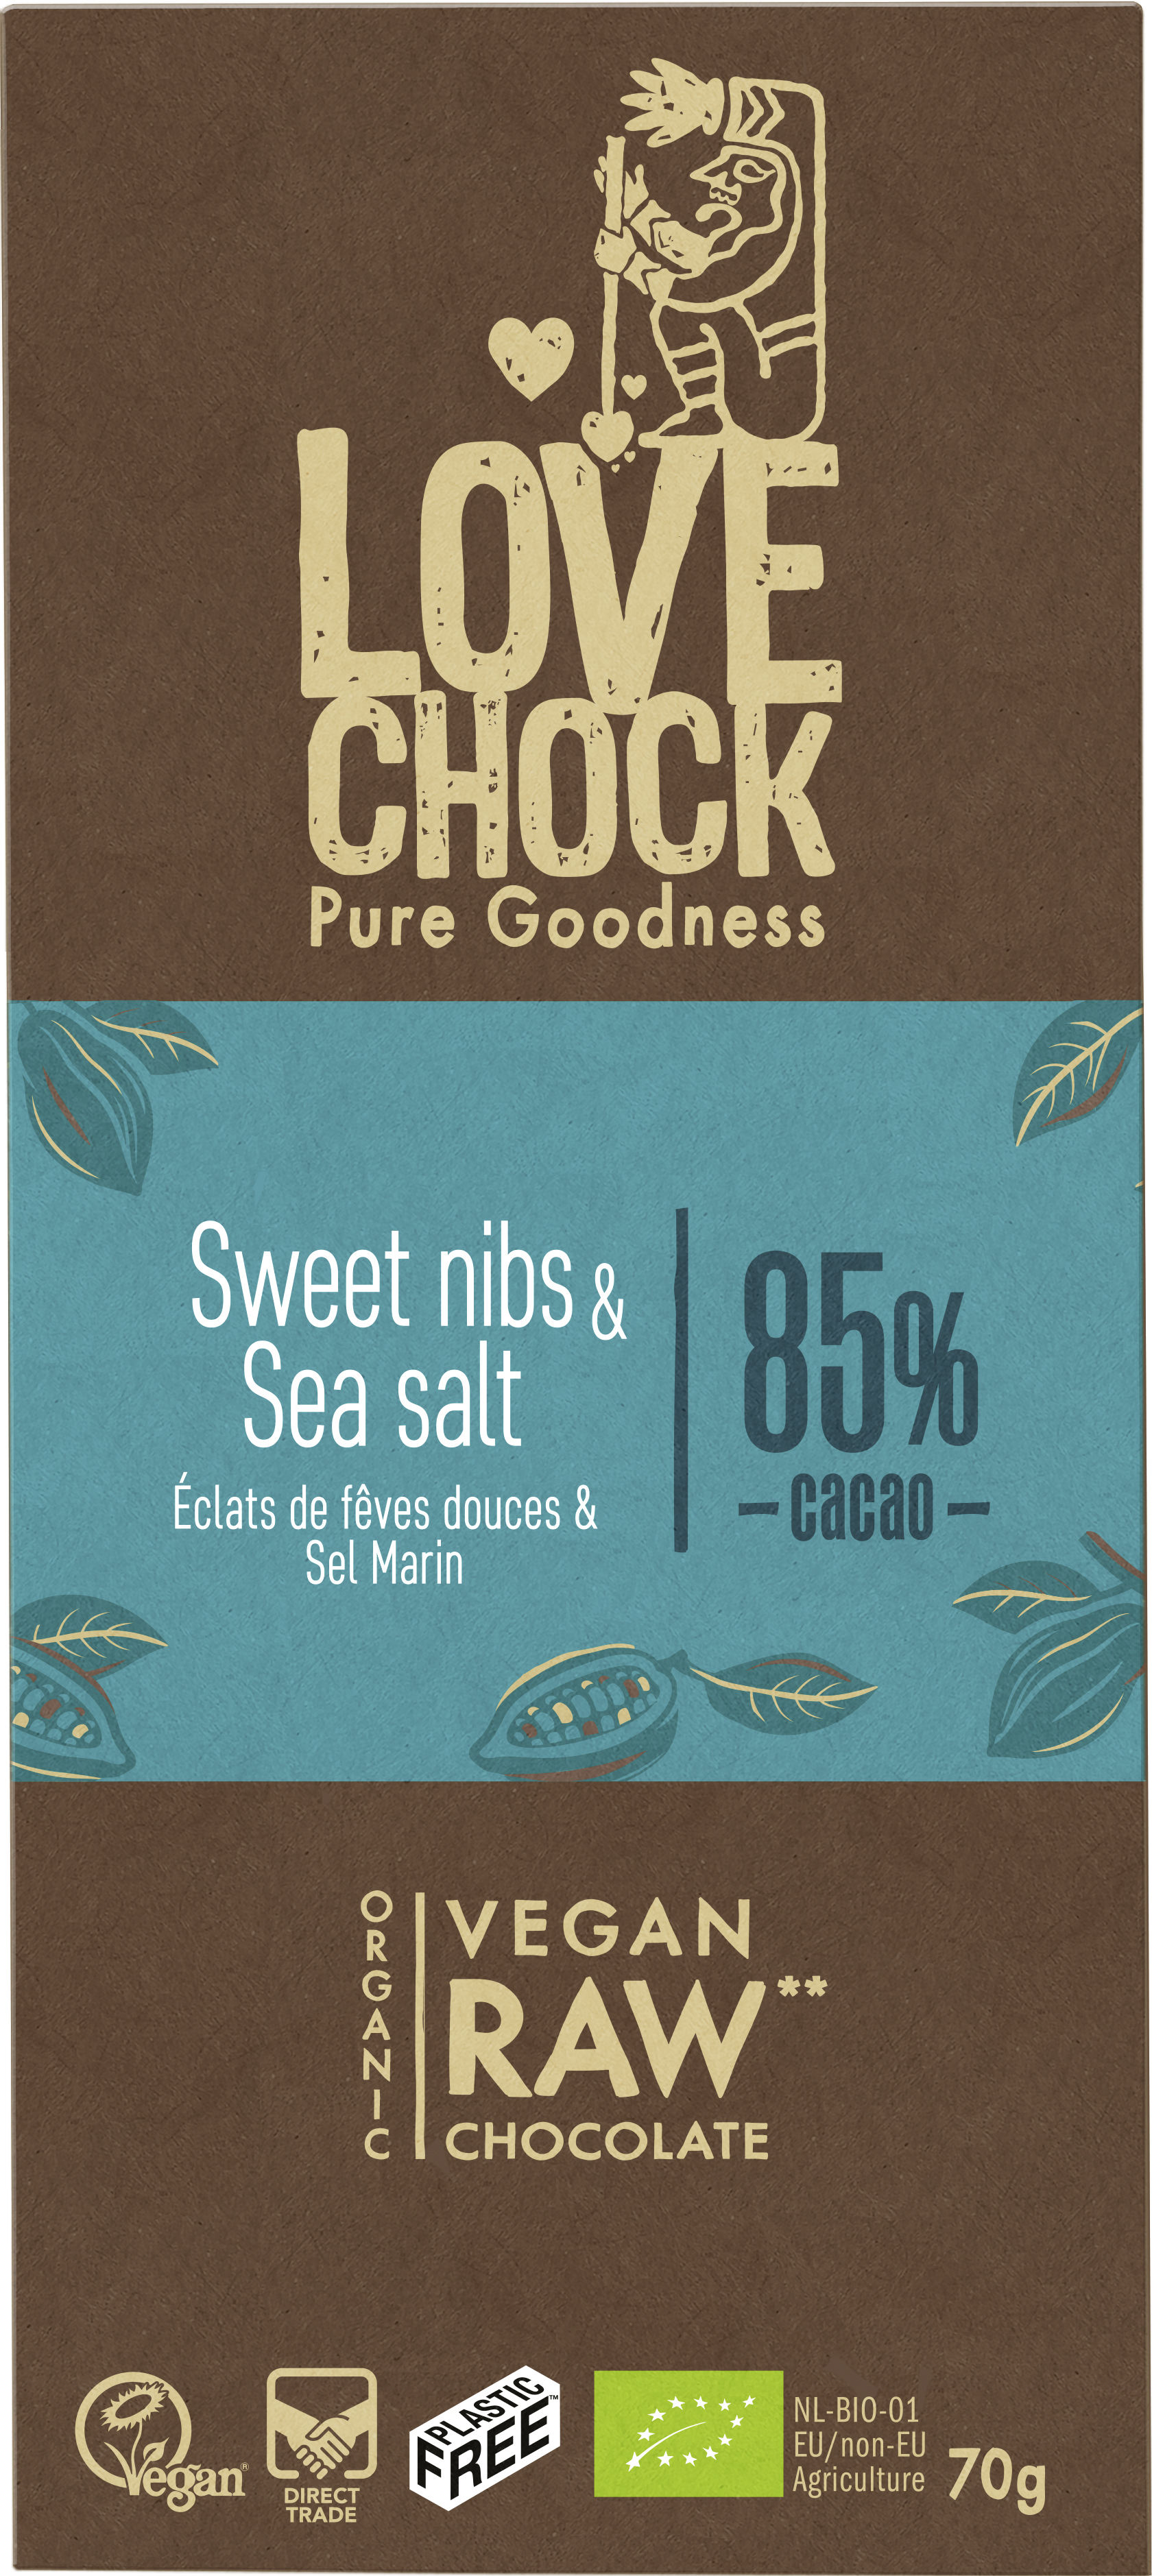 Lovechock Eclats de fèves douces & sel marin 85% cacao tablette bio & raw 70g